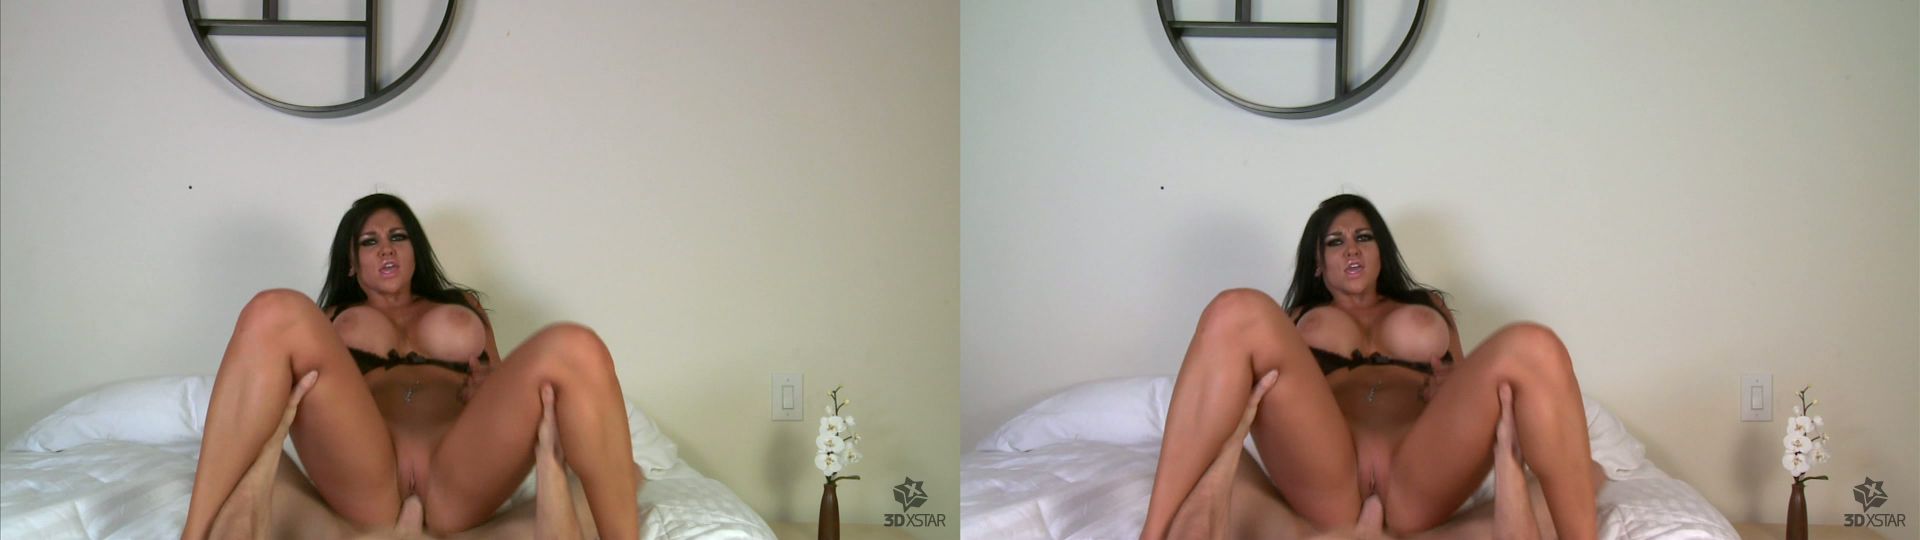 Crossview 3D XXX NSFW Waiting For You In Your Bed Starring Audrey Bitoni